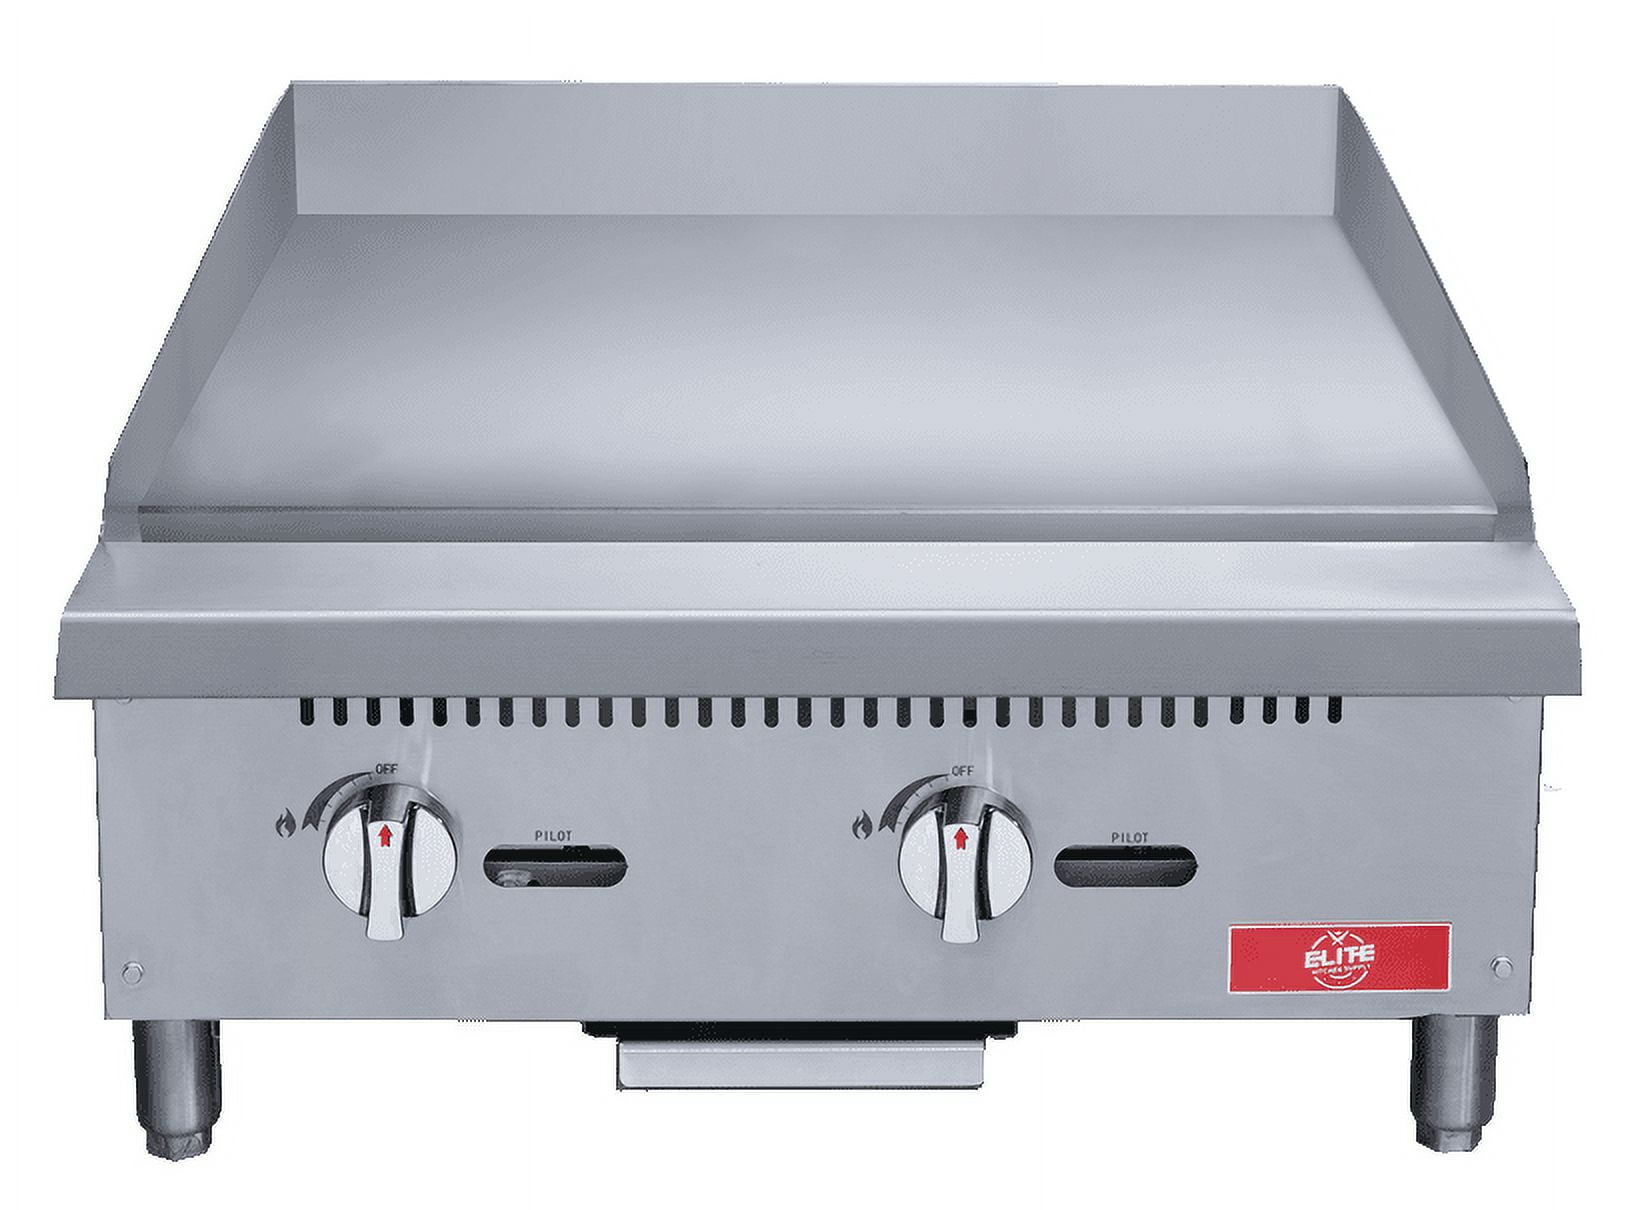 BENTISM 23.5x16 Flat Top Griddle Stainless Steel BBQ Gas Grill 2 Burners  Silver 